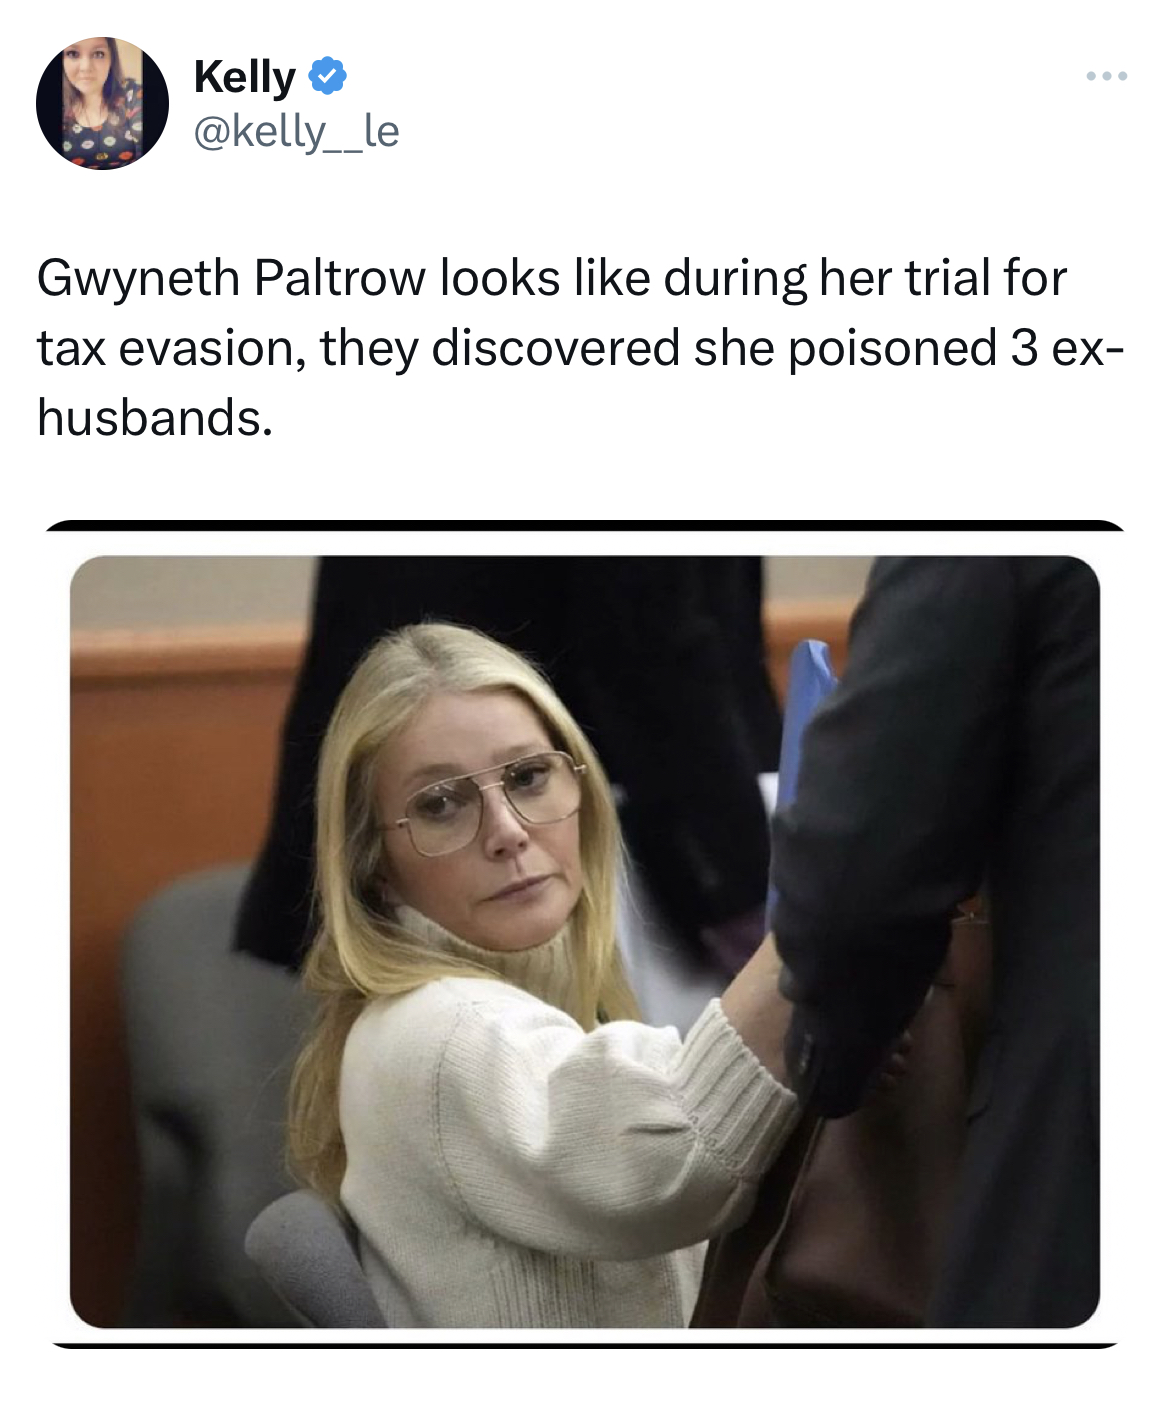 Savage and Unhinged tweets Gwyneth Paltrow - Kelly www Gwyneth Paltrow looks during her trial for tax evasion, they discovered she poisoned 3 ex husbands.